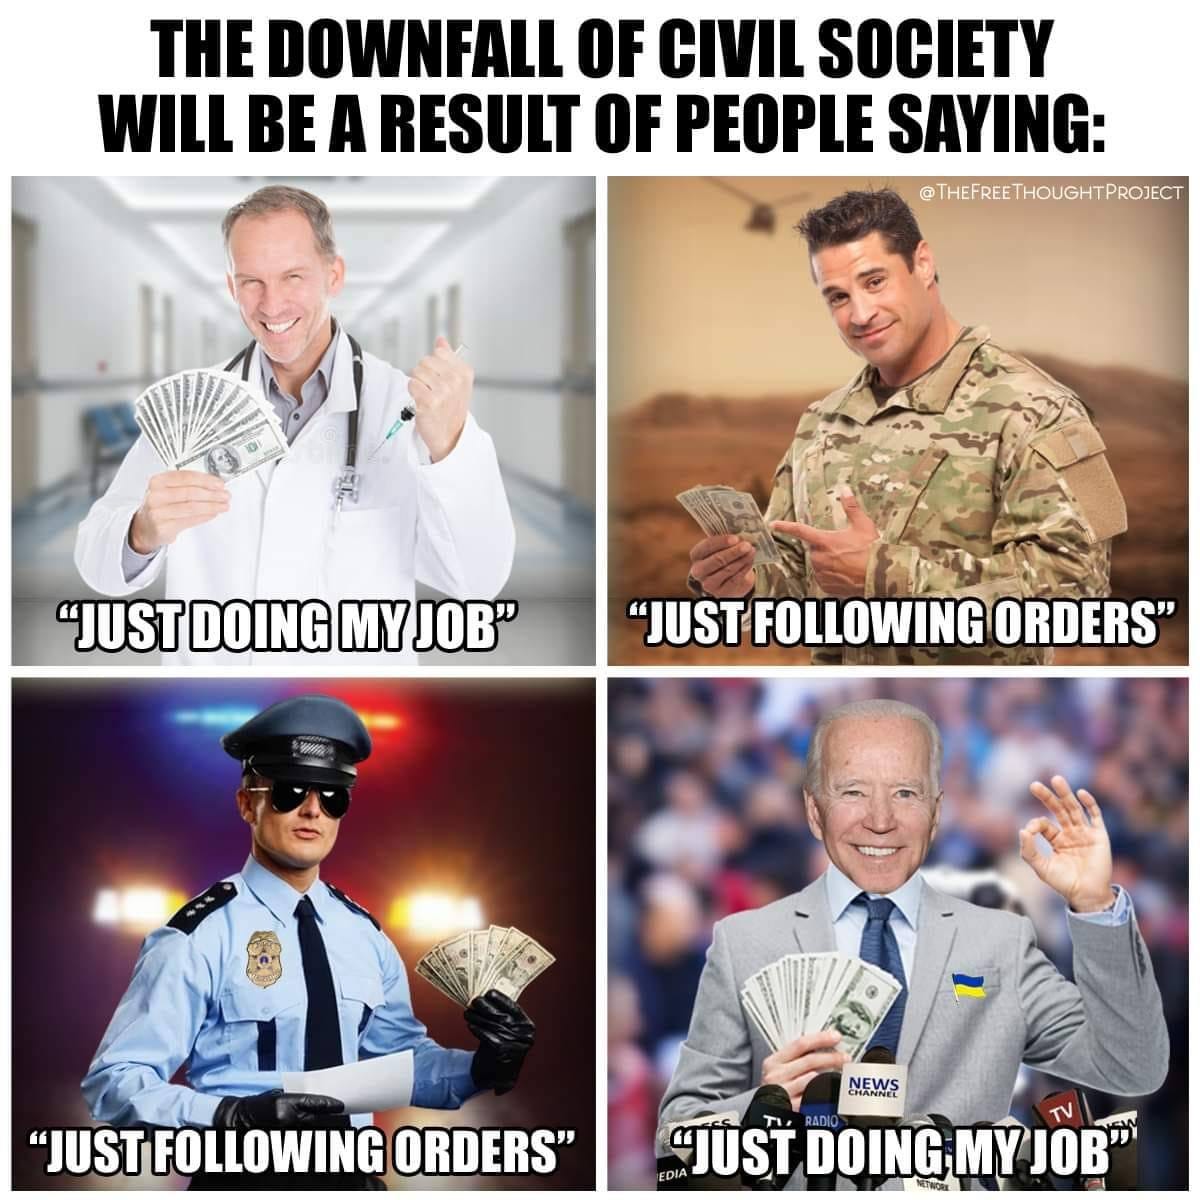 May be an image of 4 people and text that says "THE DOWNFALL OF CIVIL SOCIETY WILL BE A RESULT OF PEOPLE SAYING: THEFREETHOUGHTPROJECT "JUST DOING MY JOB" "JUSTFOLLOWING ORDERS" "JUSTFOLLOWING ORDERS" NEWS "JUST DOING MY JOB""